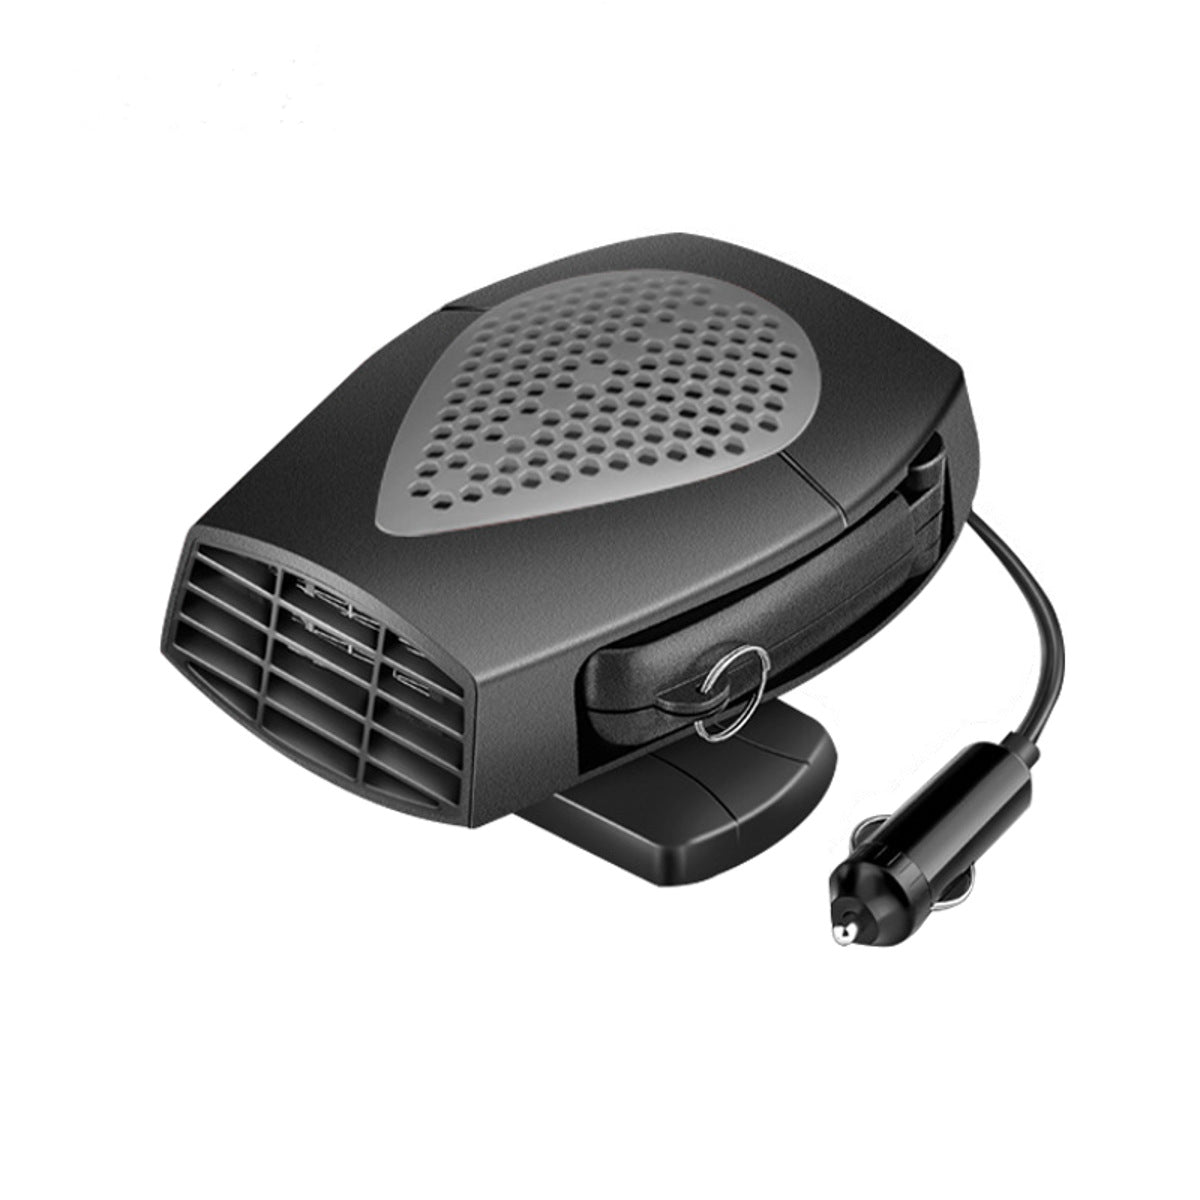 12V/24V Car Defroster Heater 3 In 1 Air Purifier Auto Demister Cooler Dryer Dehumidifiers - Auto GoShop